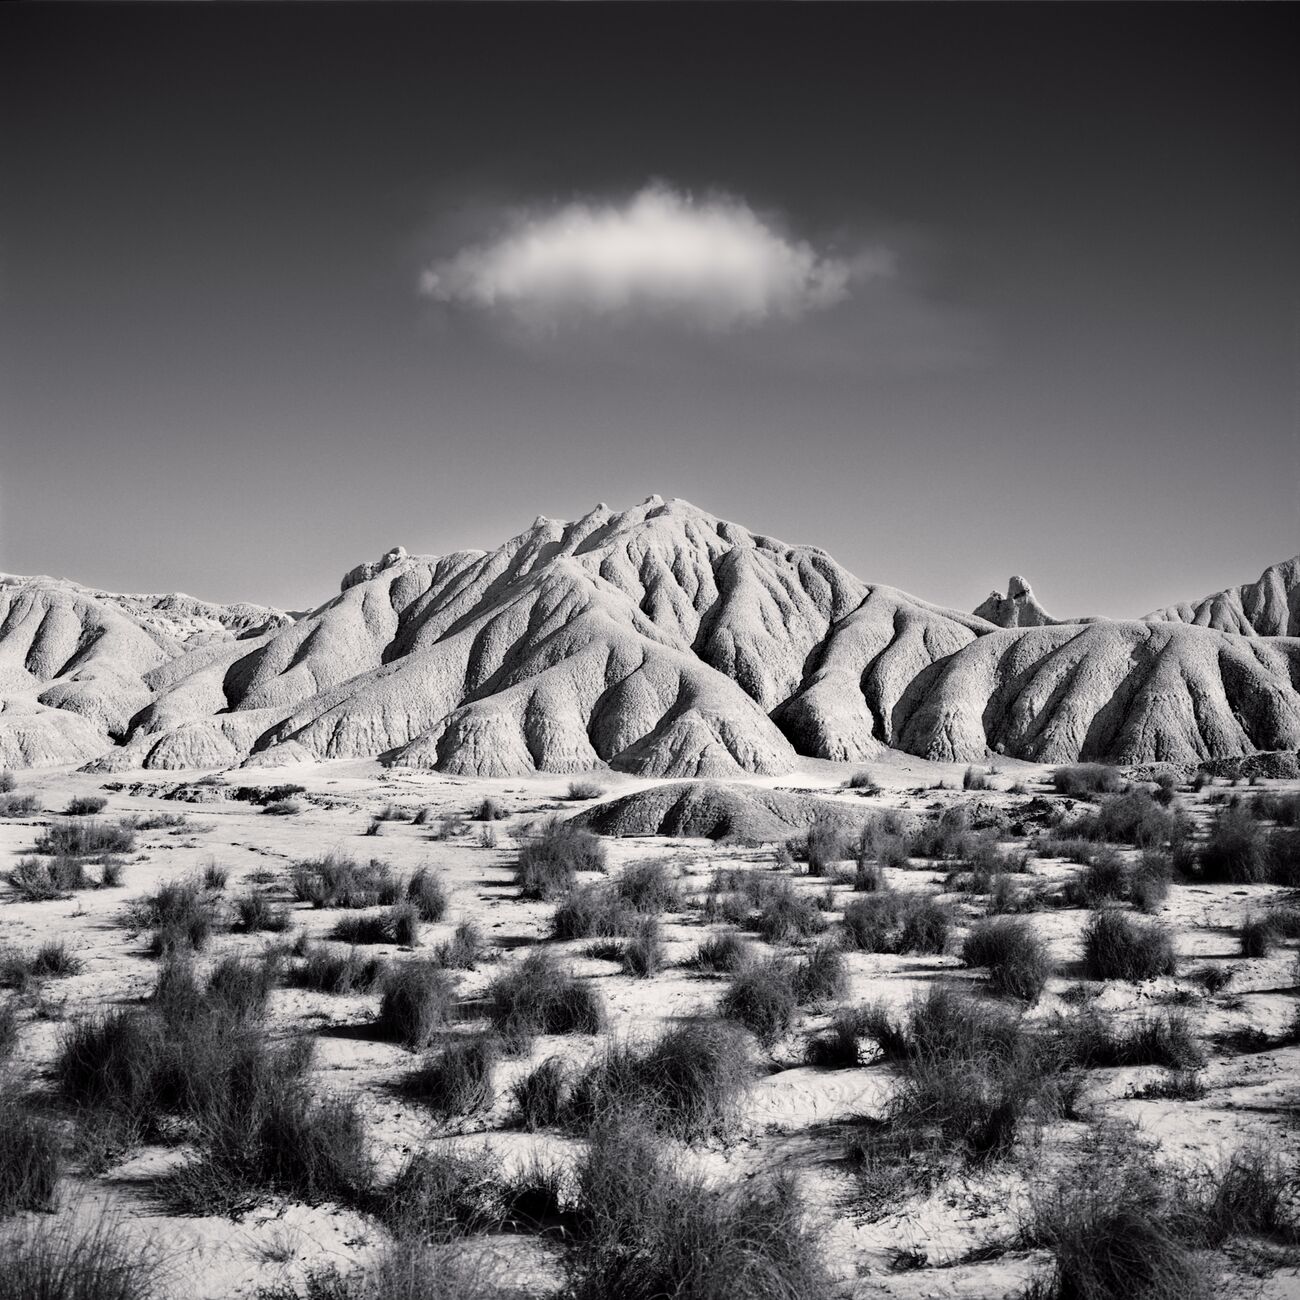 Cloud Over Dry Hills, Bardenas Reales, Spain. February 2022. Ref-11577 - Denis Olivier Photography